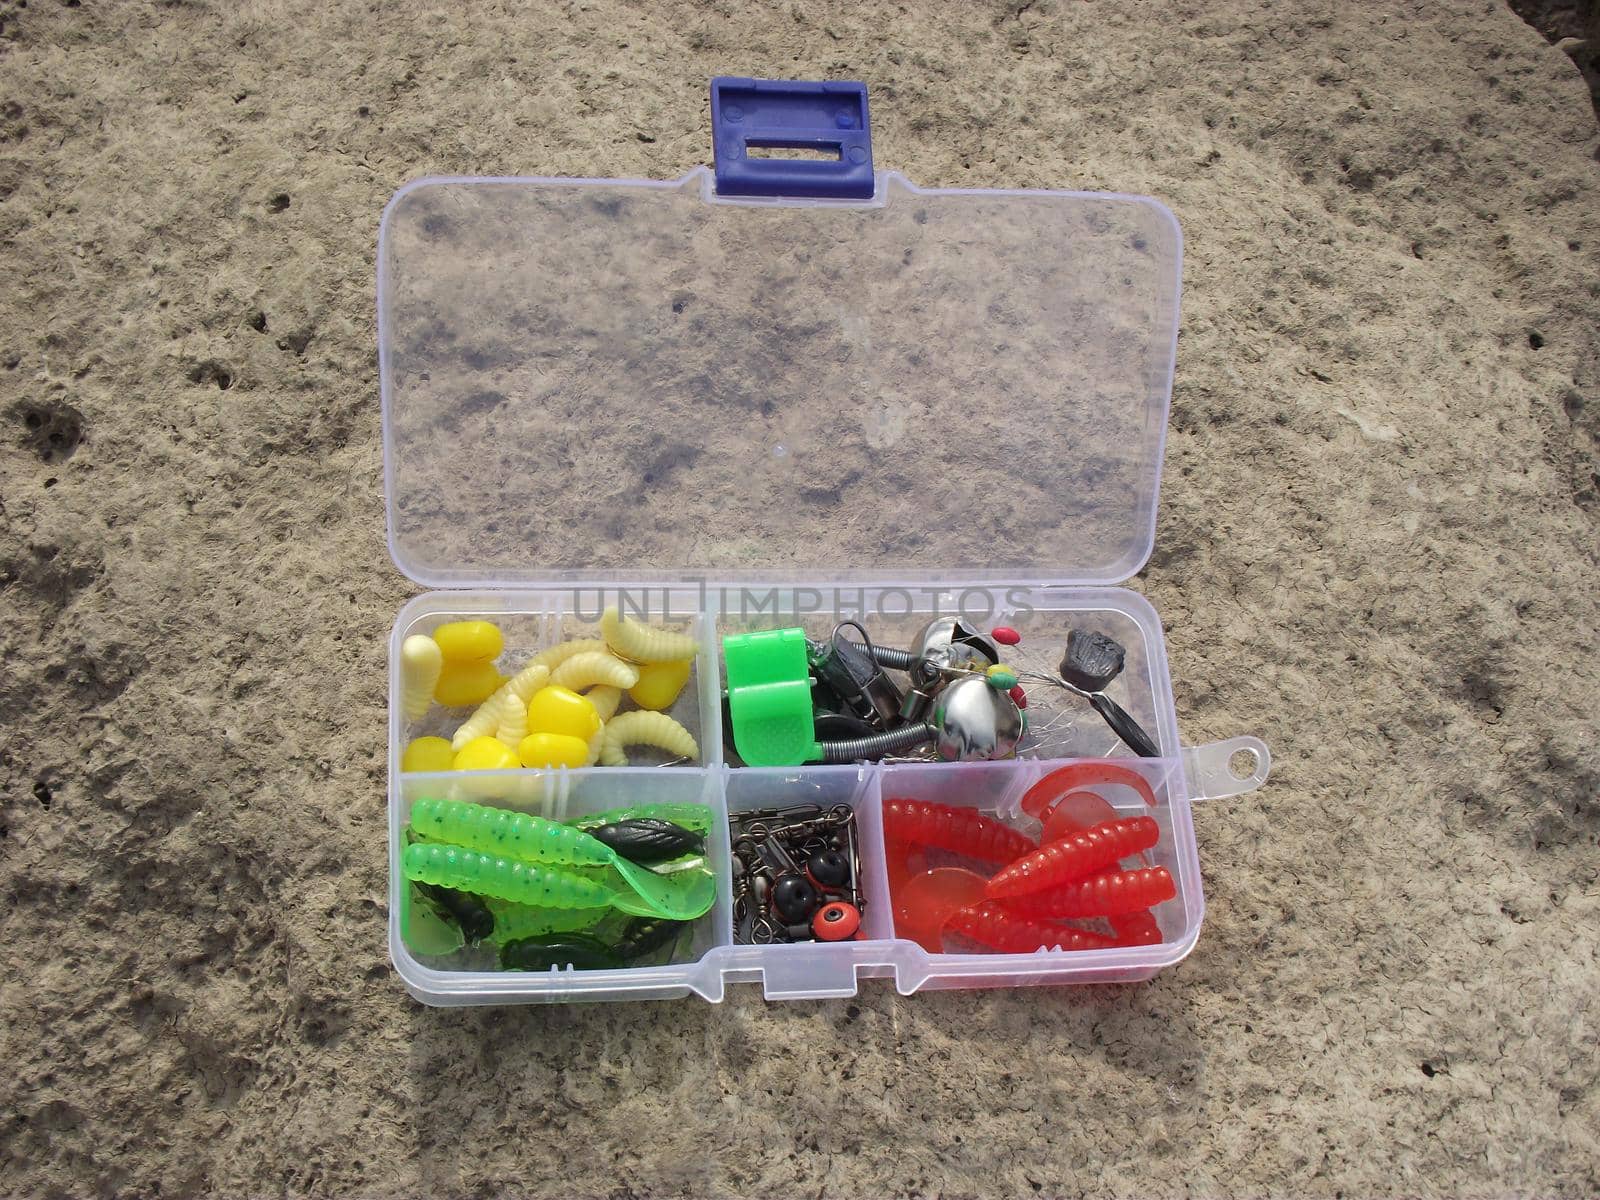 on the rocky shore, on one of the large stones, there are fishing tackle in a plastic box divided into sections